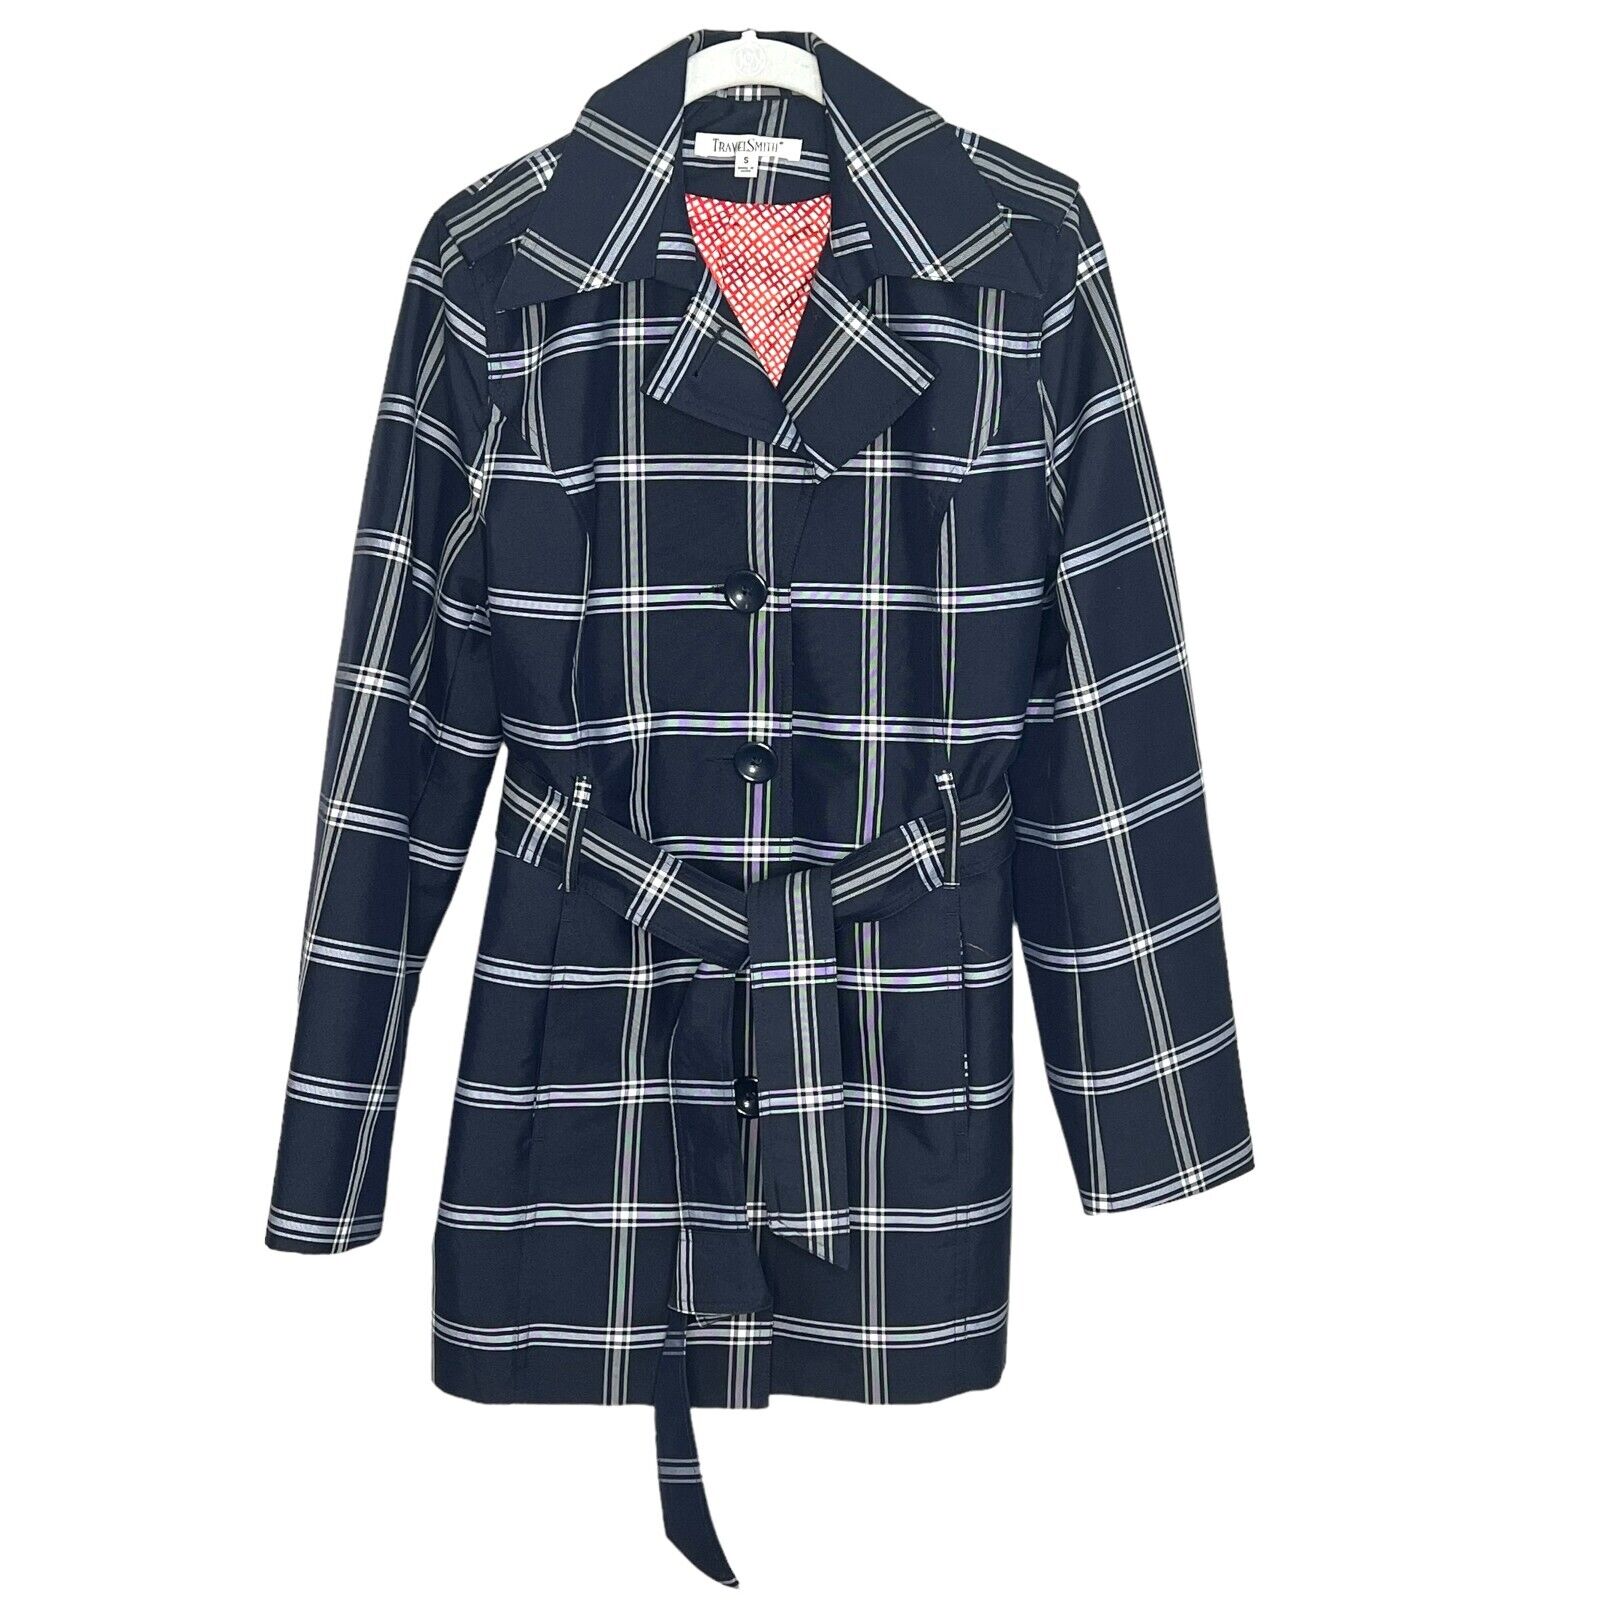 TravelSmith Blue White Plaid Belted Jacket Trench Size Small